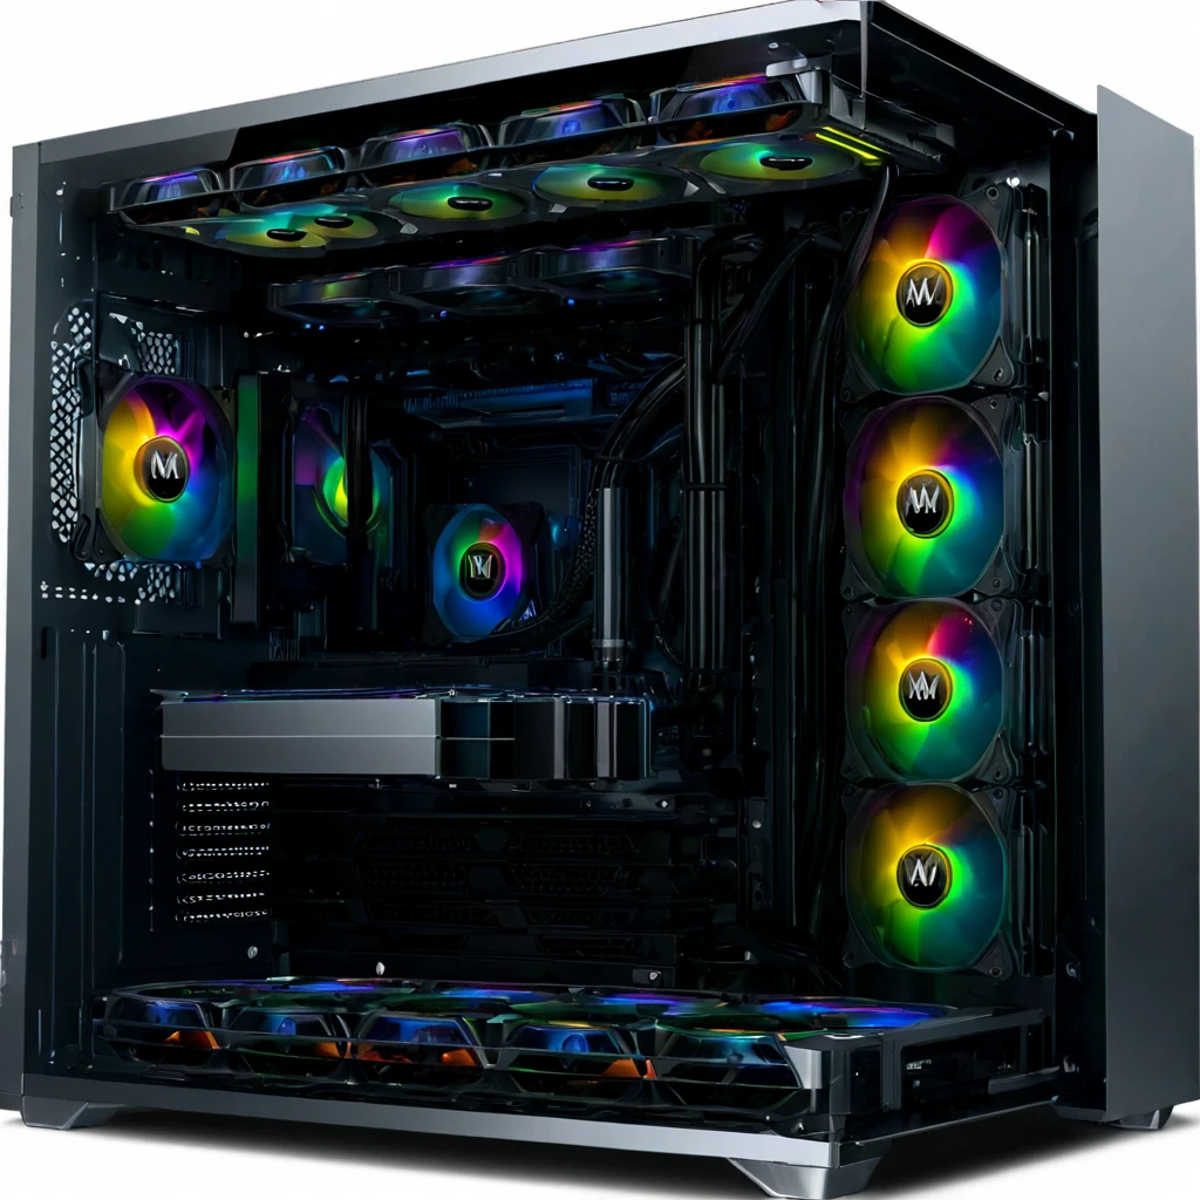 (pc showcase, fully equipped, liquid cooling tubing, rgb lights, Silver case) <lora:46_pc_showcase:1.1>
Silver background,...